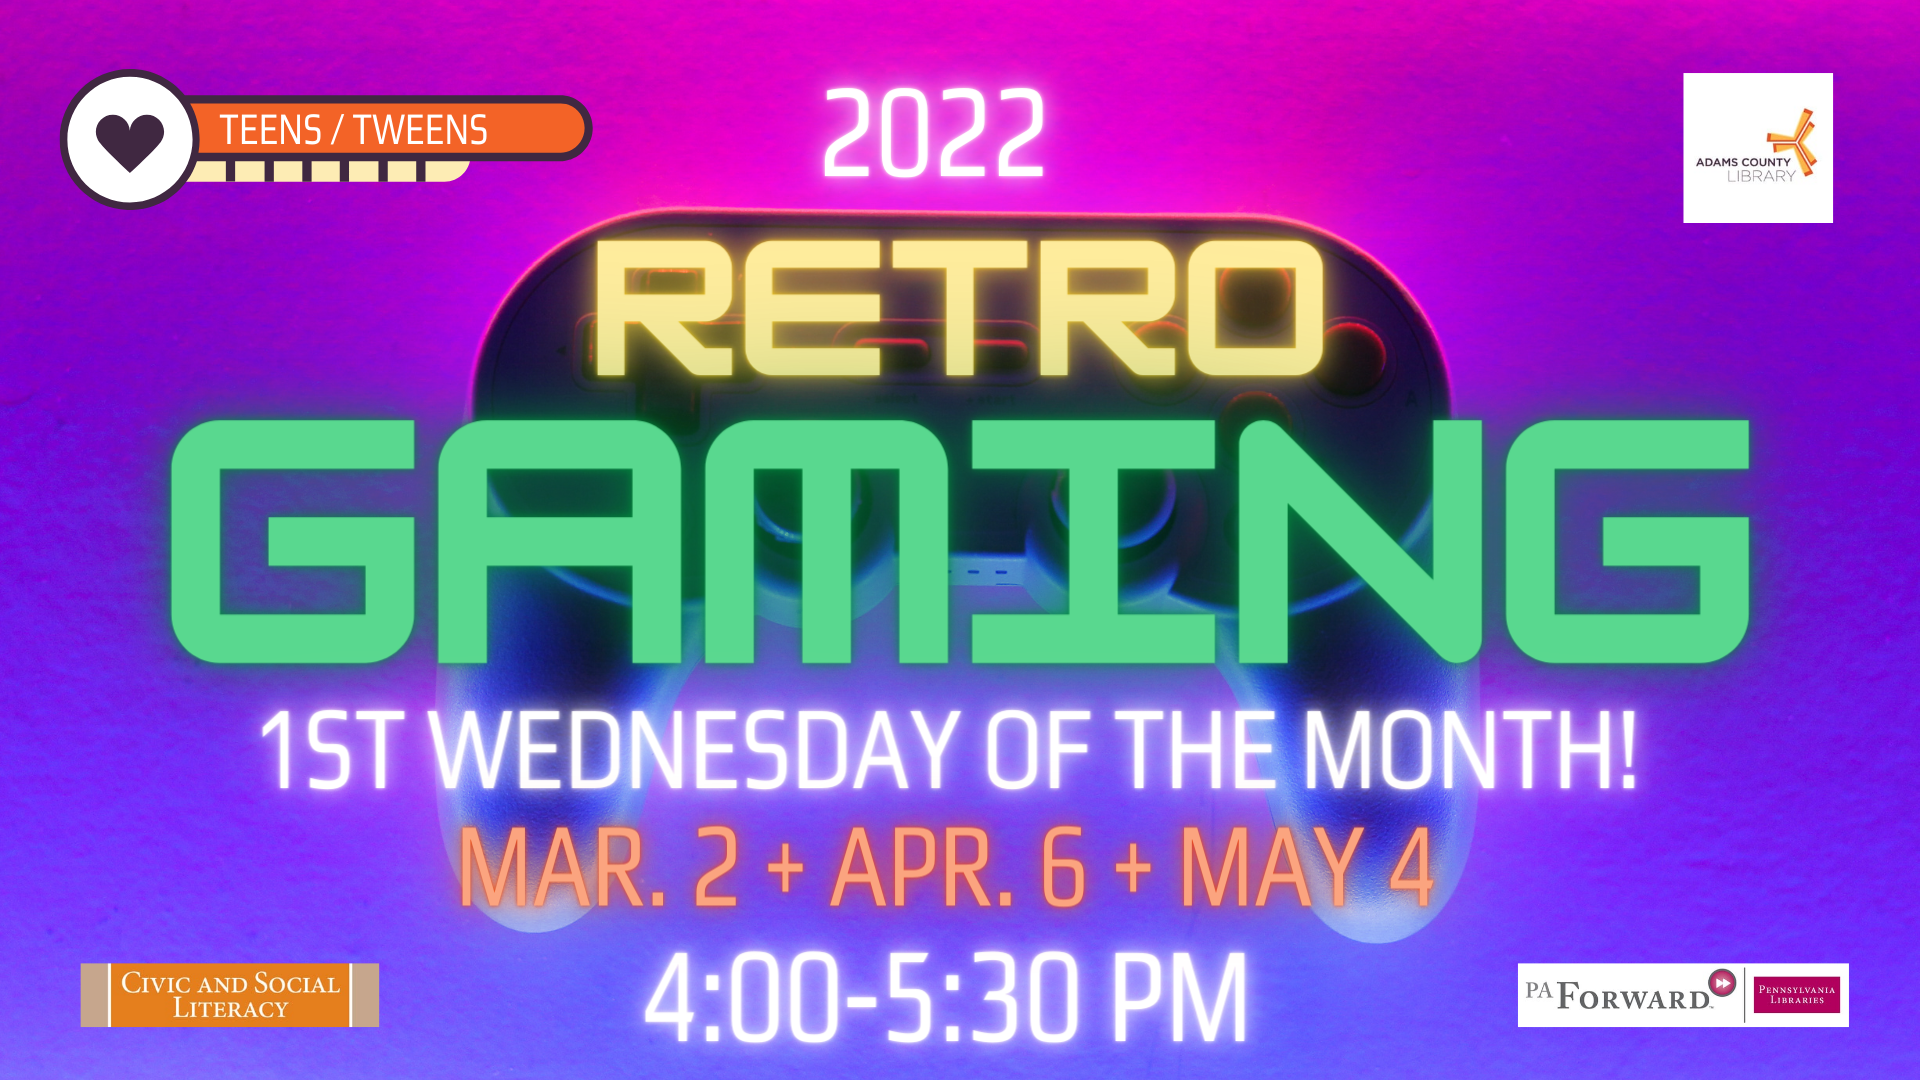 Join us for Retro Gaming the first Wednesday of the month. For tweens and teens.